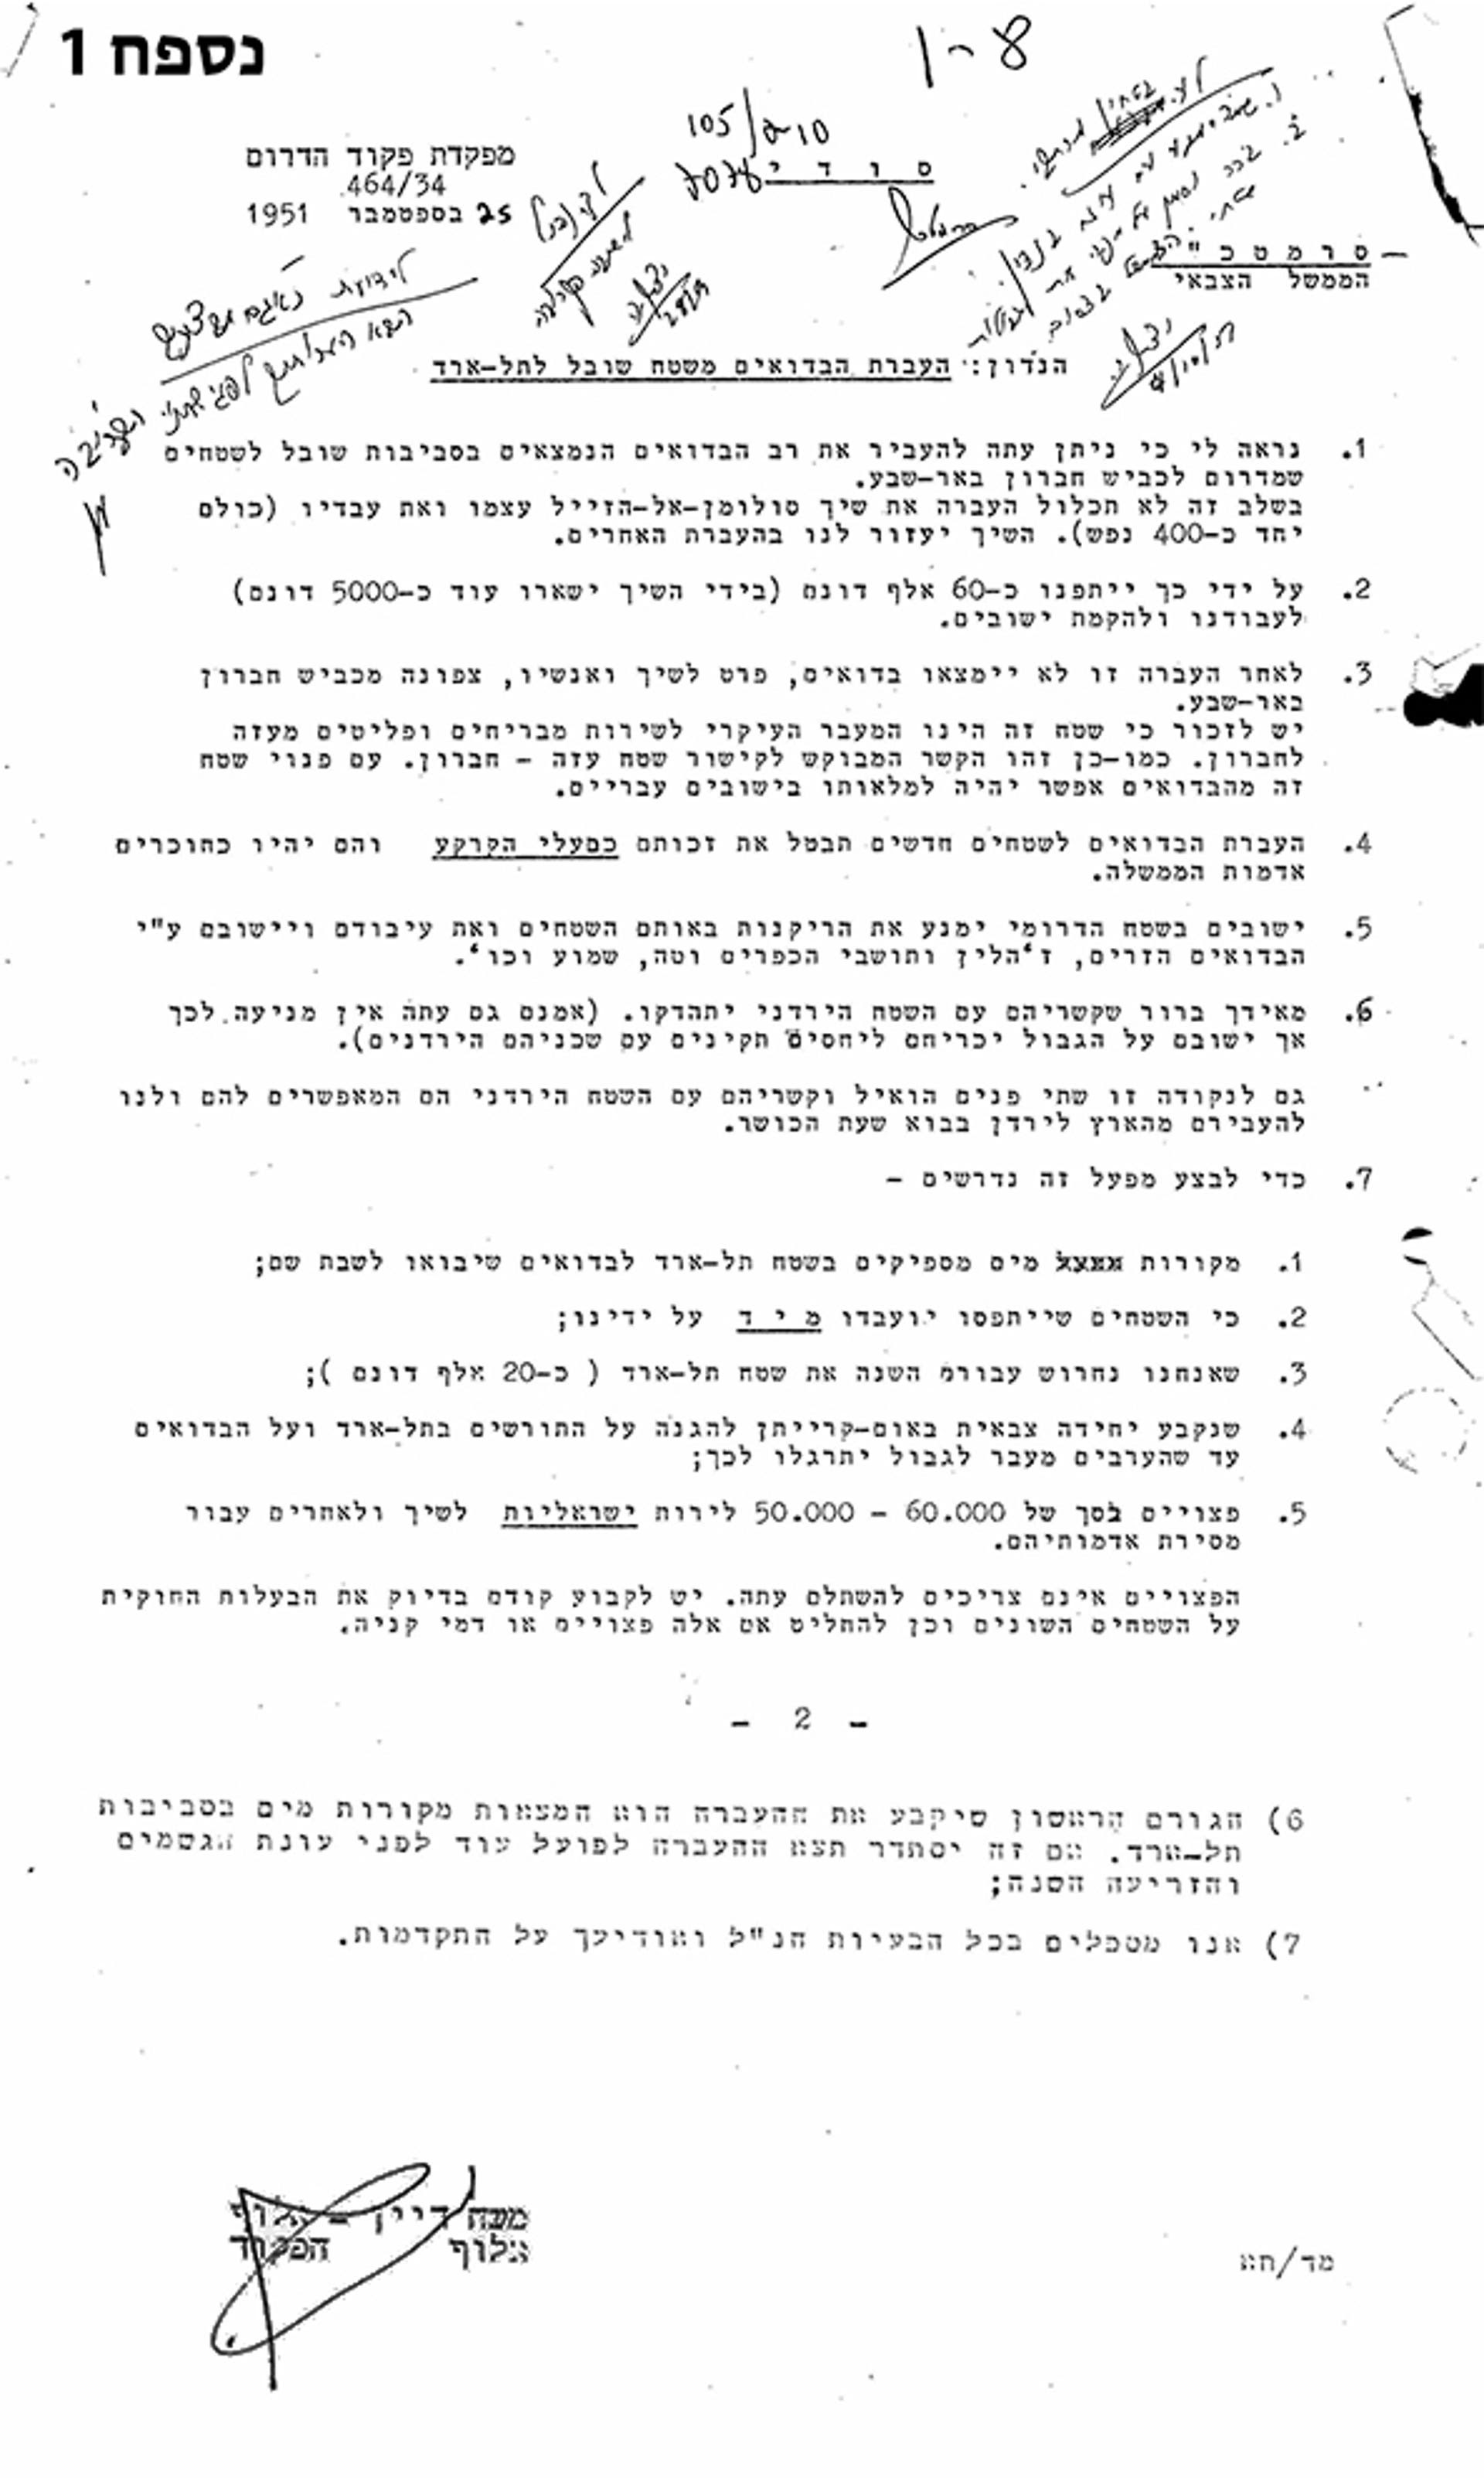 Letter from Moshe Dayan, the head of the Southern Command, to the deputy chief of staff, dated Sept. 25, 1951.